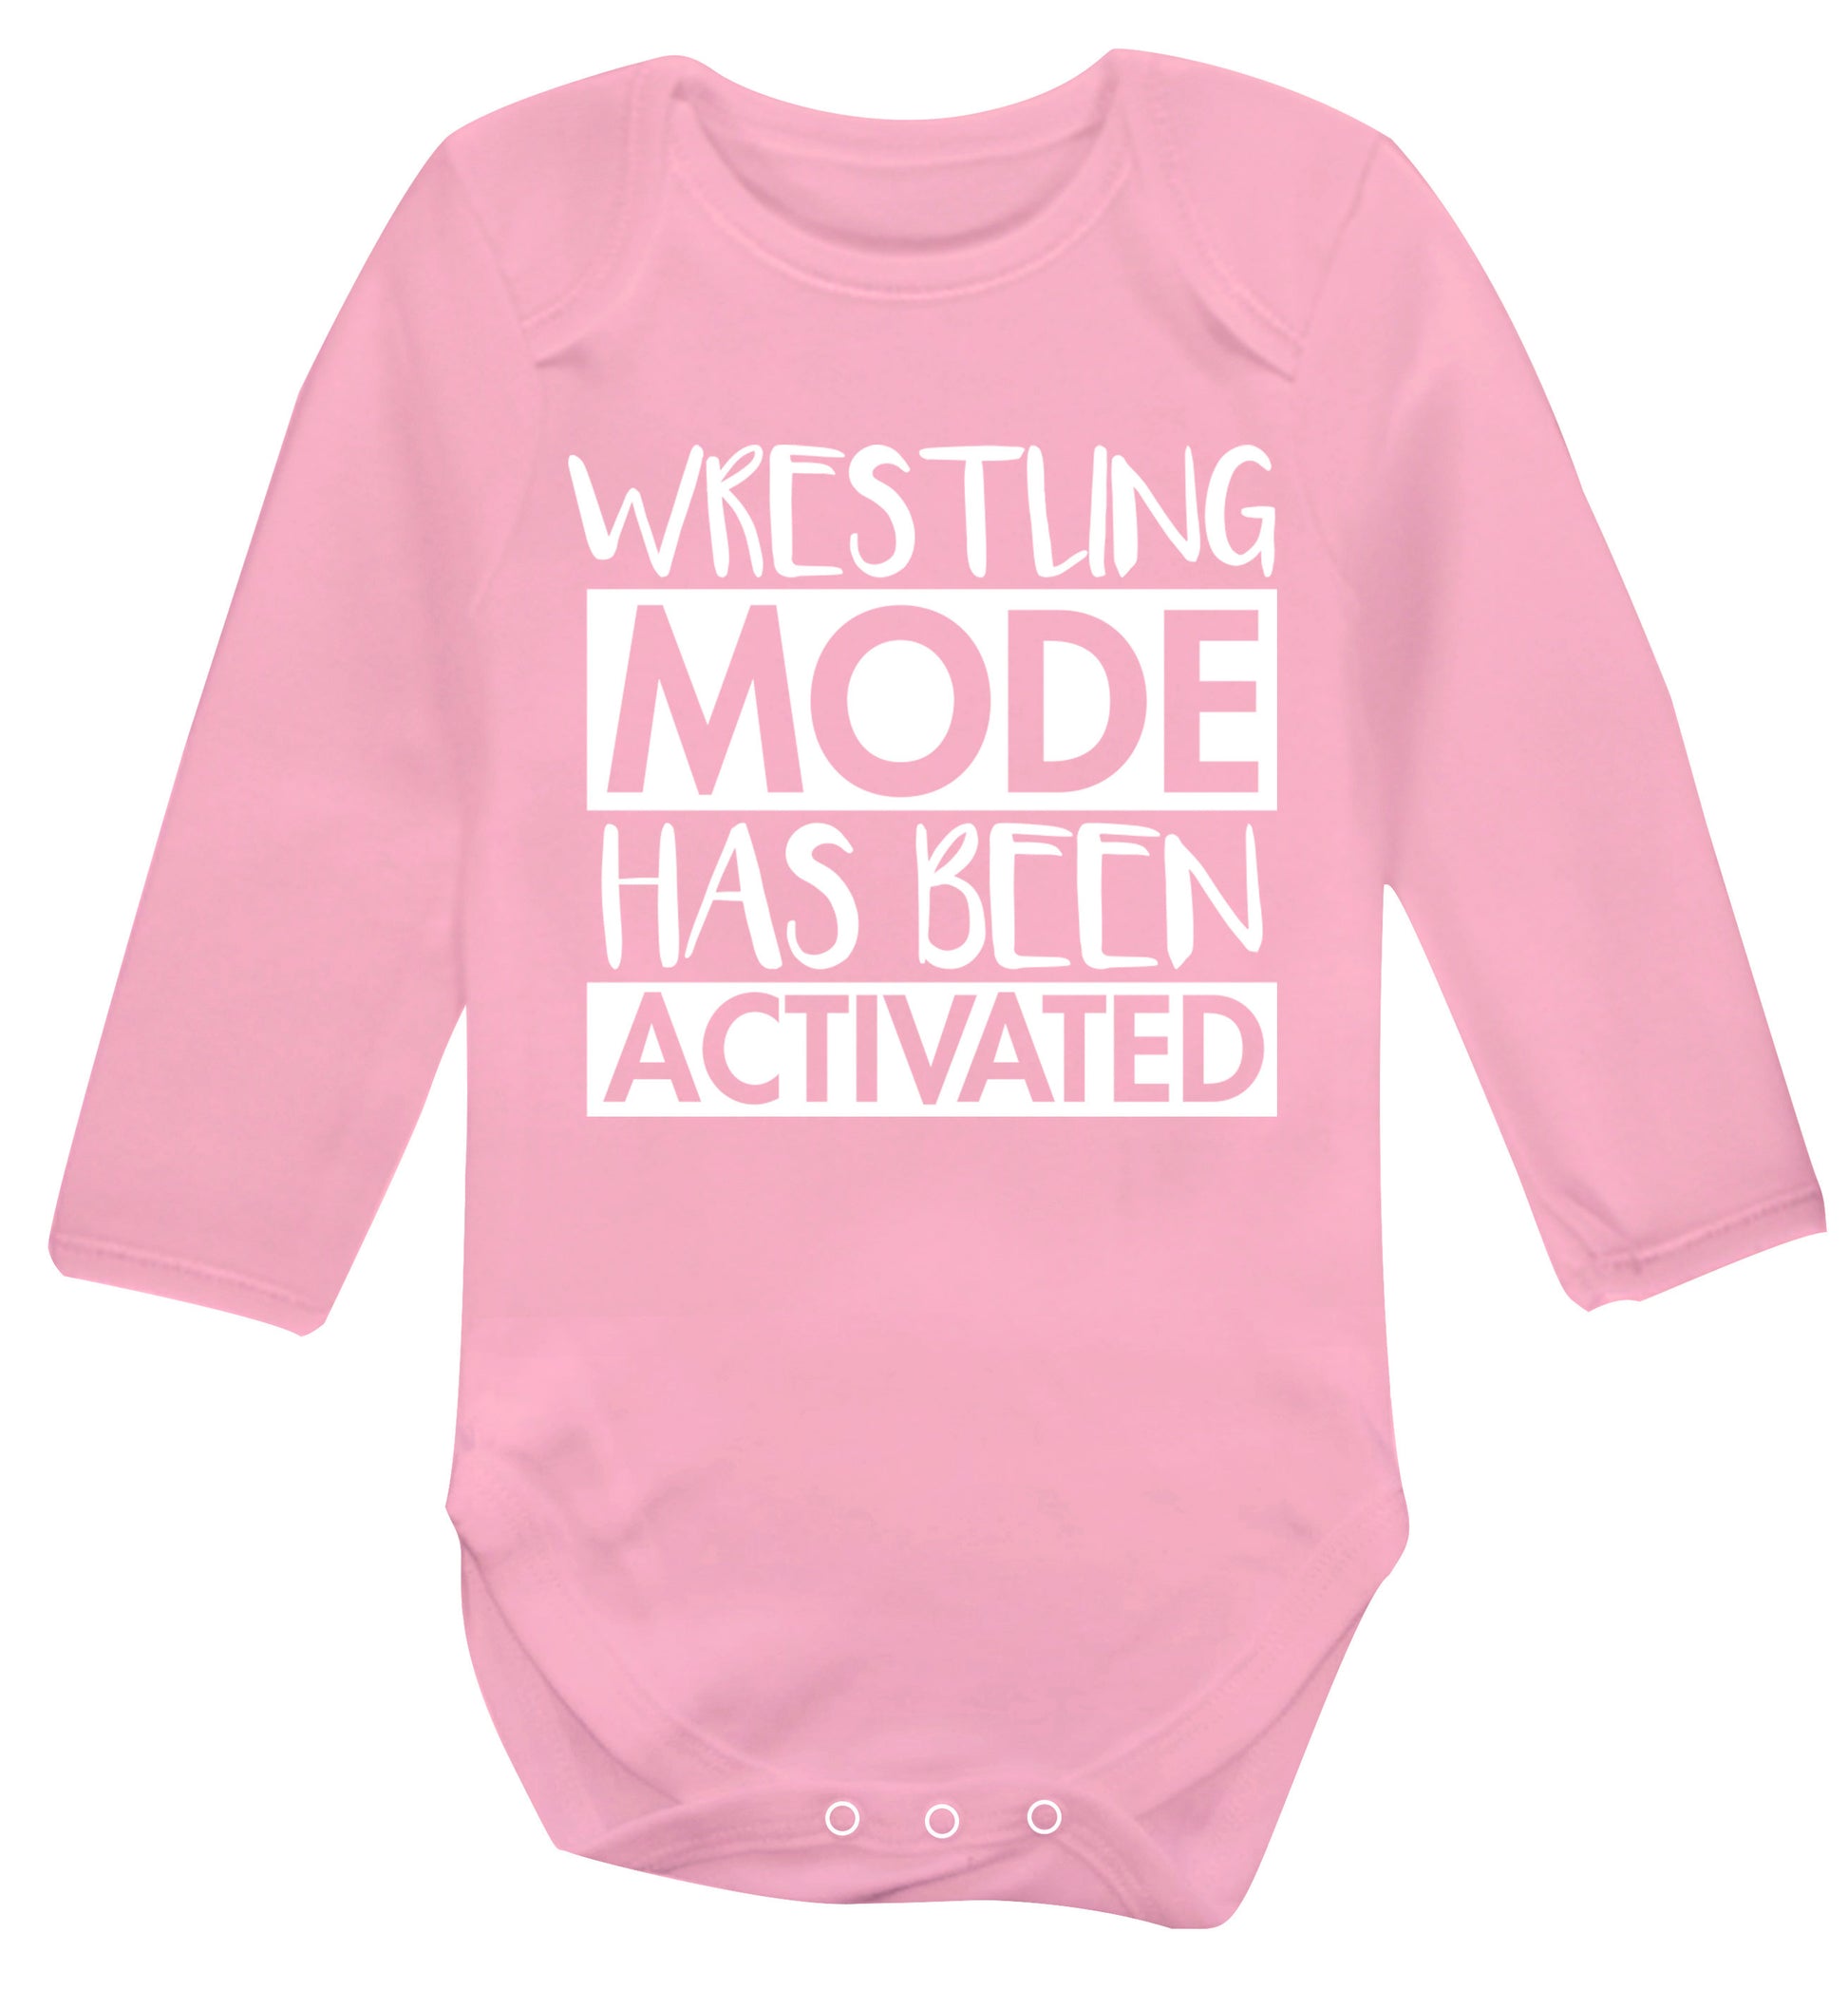 Wresting mode activated Baby Vest long sleeved pale pink 6-12 months